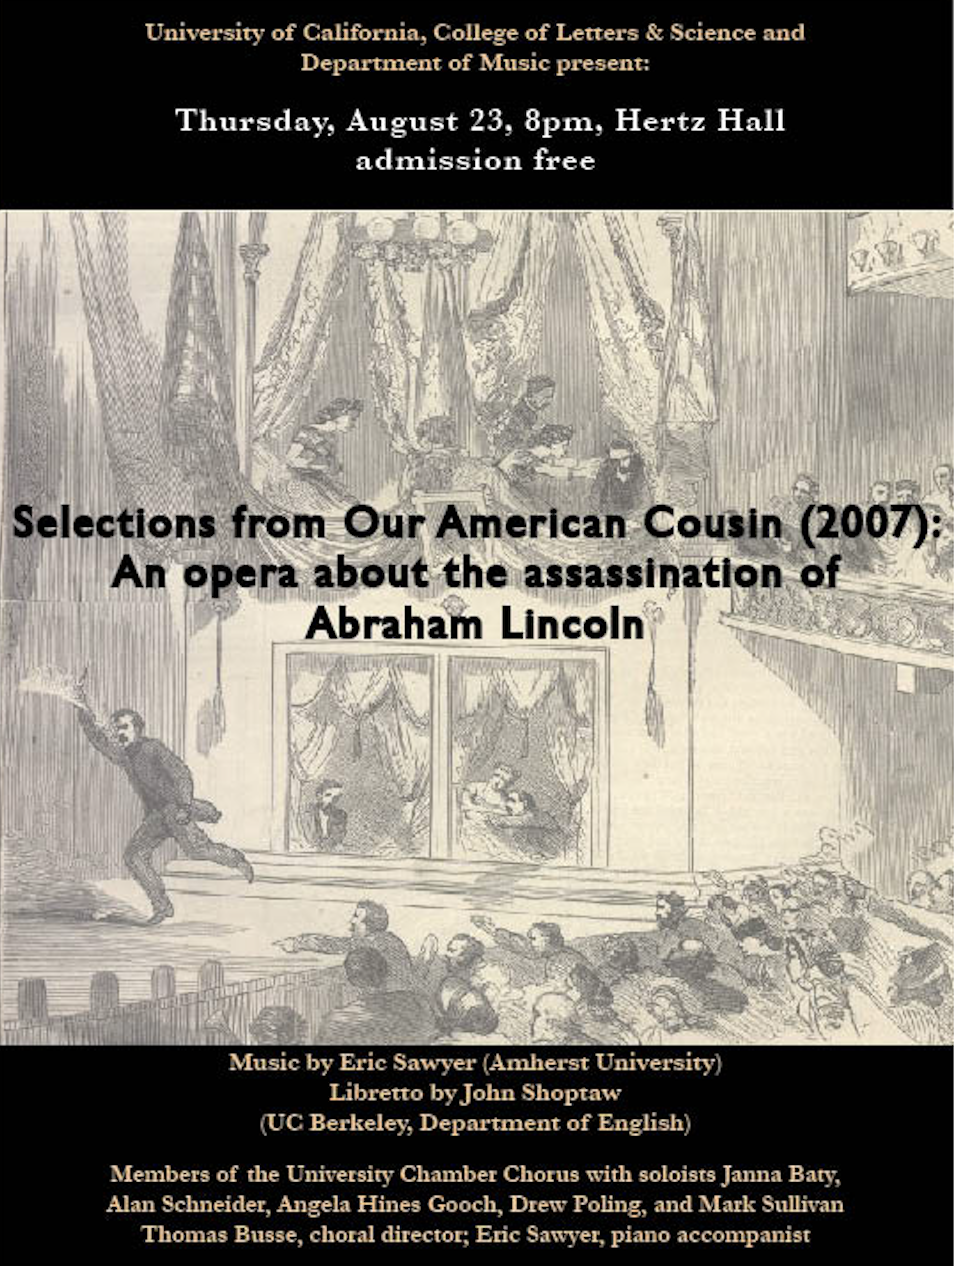 Poster for Selections from Our American Cousin event